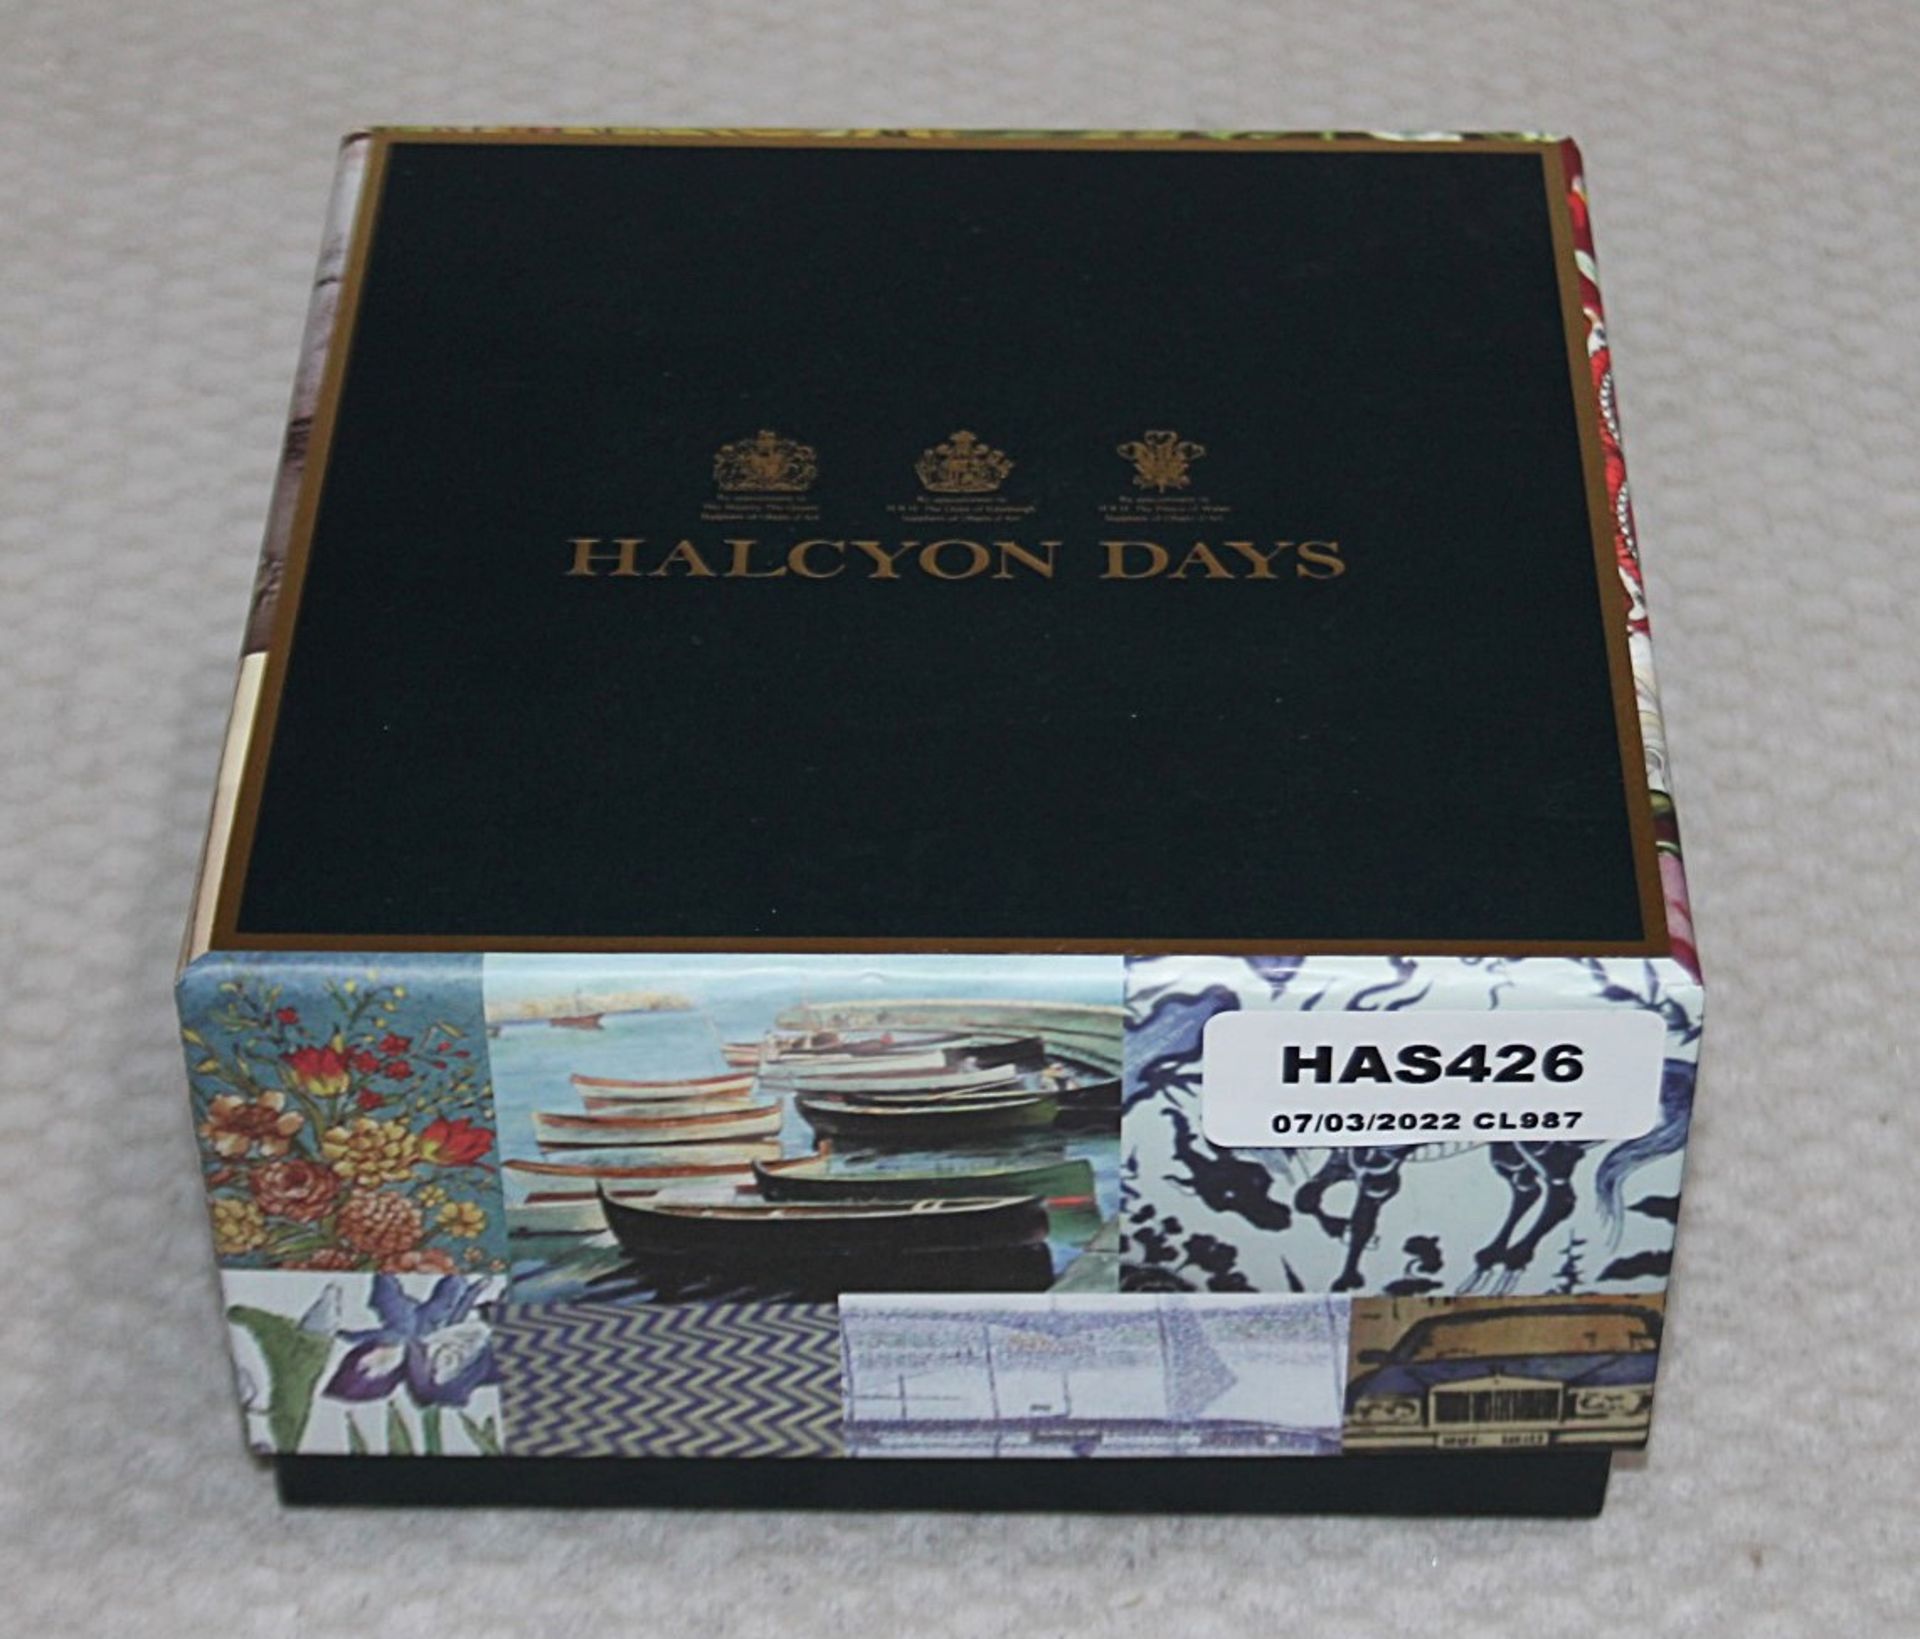 1 x HALCYON DAYS 'London Icons' Bone China Teacup & Saucer - Original Price £79.95 - Read Condition - Image 3 of 10